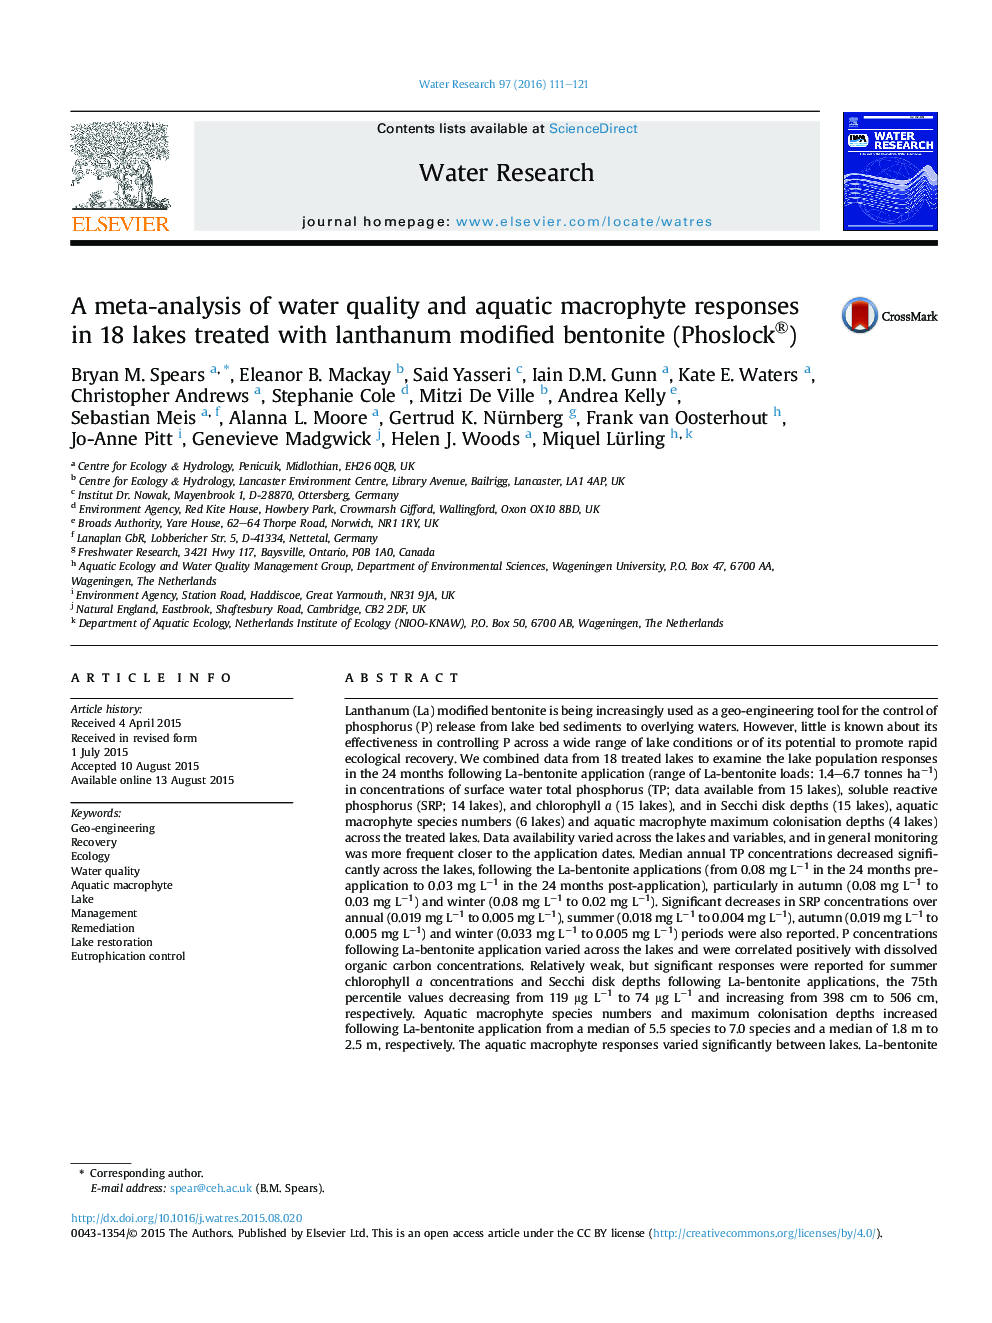 A meta-analysis of water quality and aquatic macrophyte responses inÂ 18 lakes treated with lanthanum modified bentonite (Phoslock®)